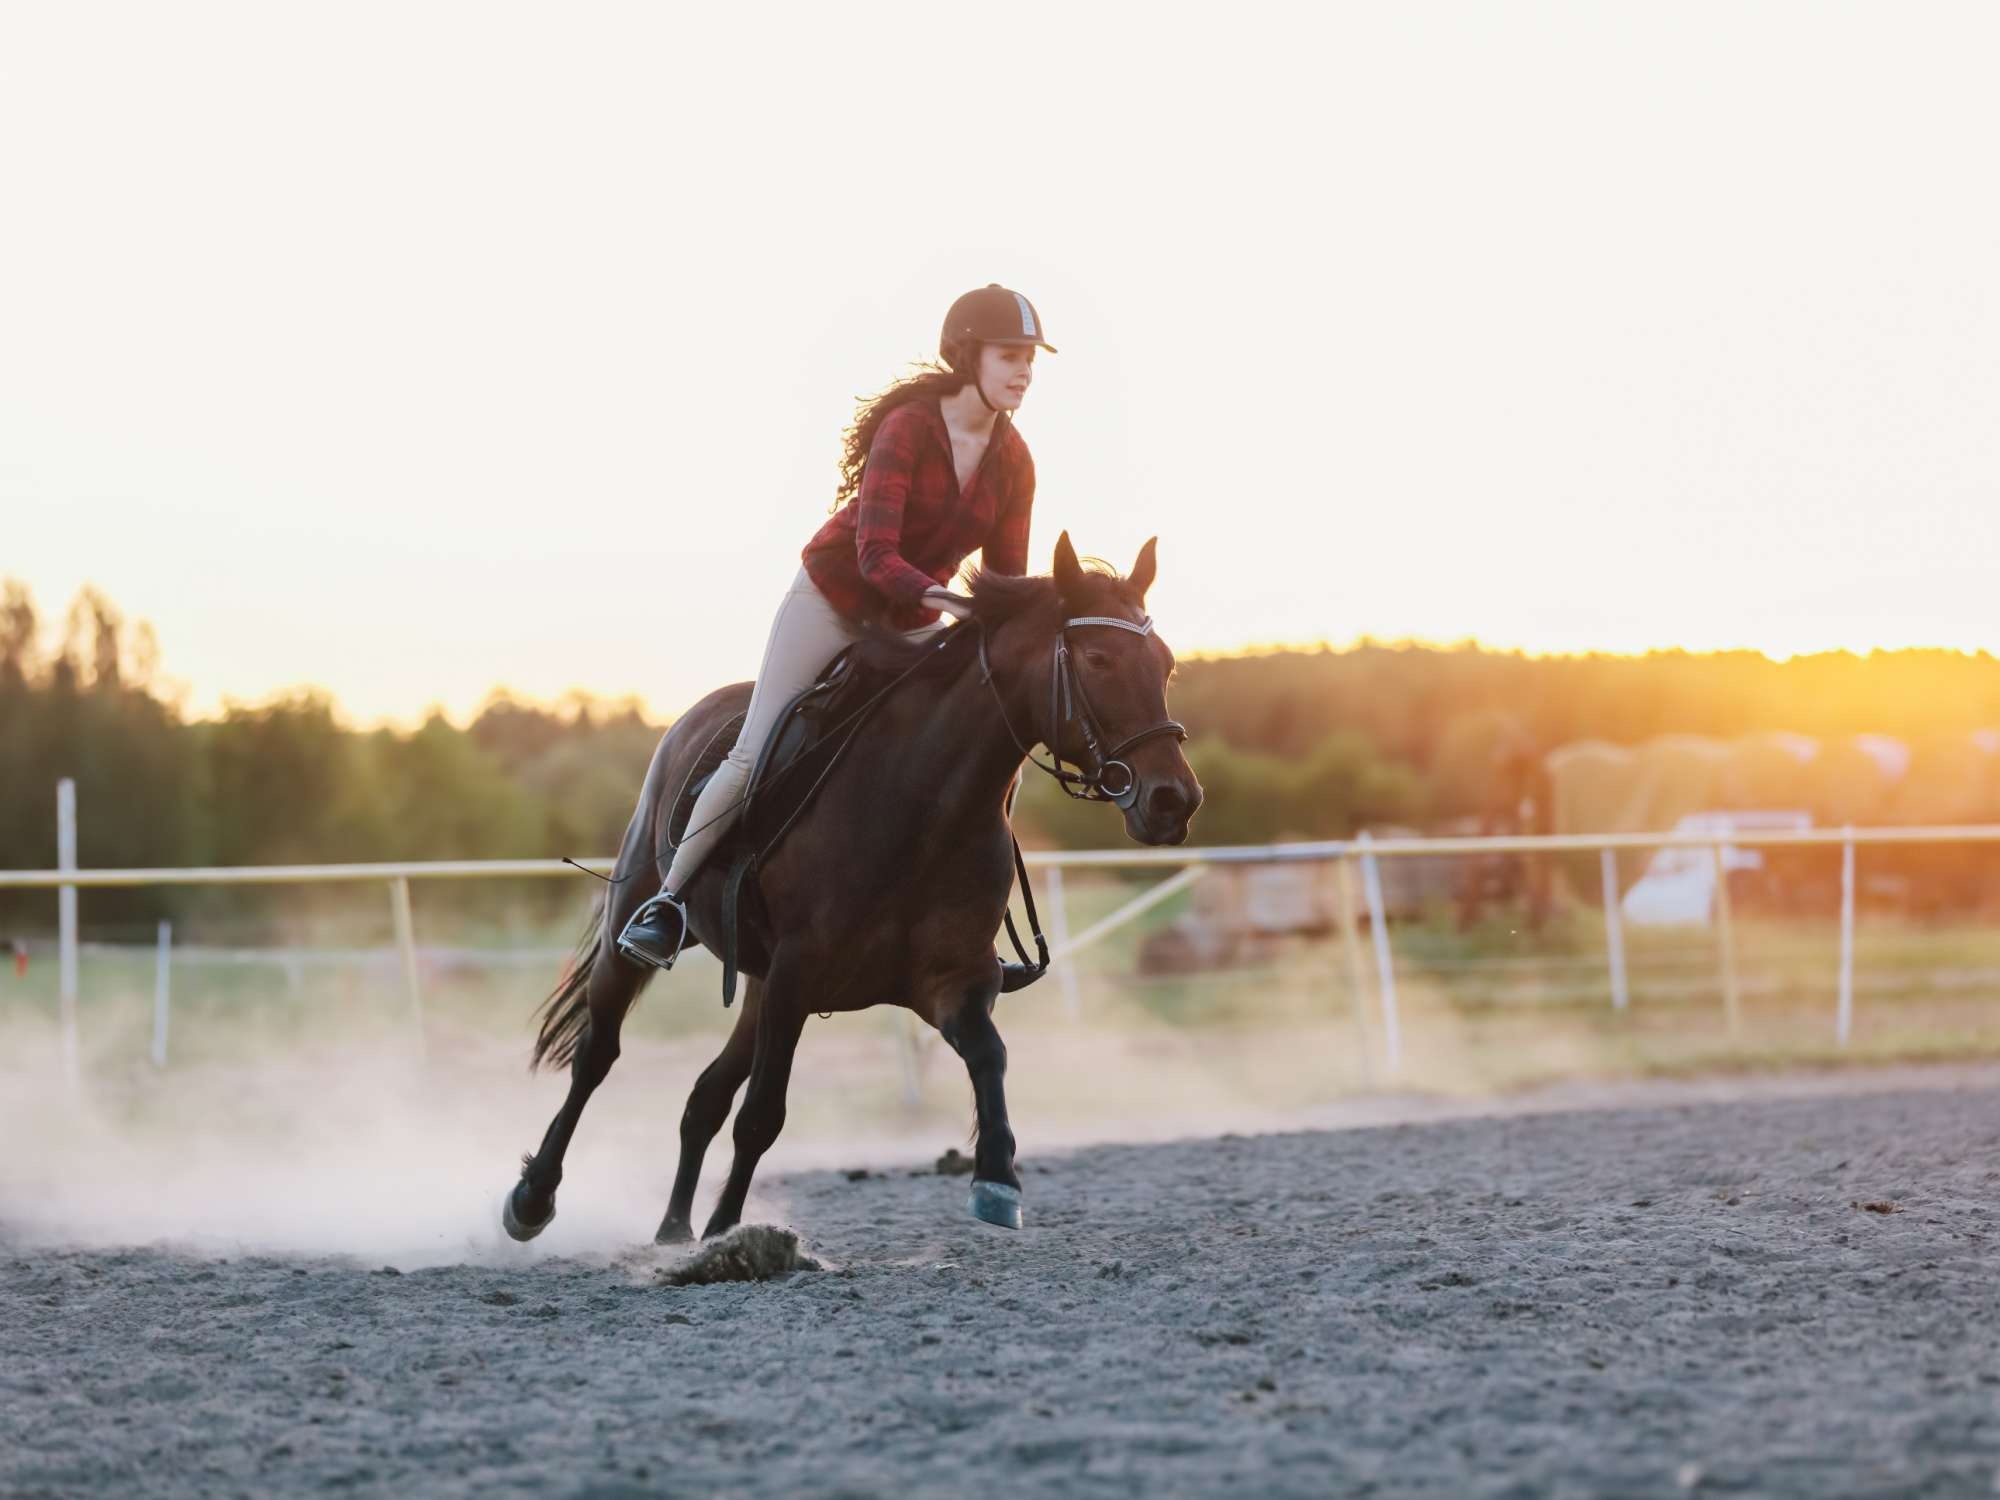 Equestrian Sports: Pleasure riding, Horse ride discipline that encompasses many forms of recreational riding for personal enjoyment. 2000x1500 HD Background.